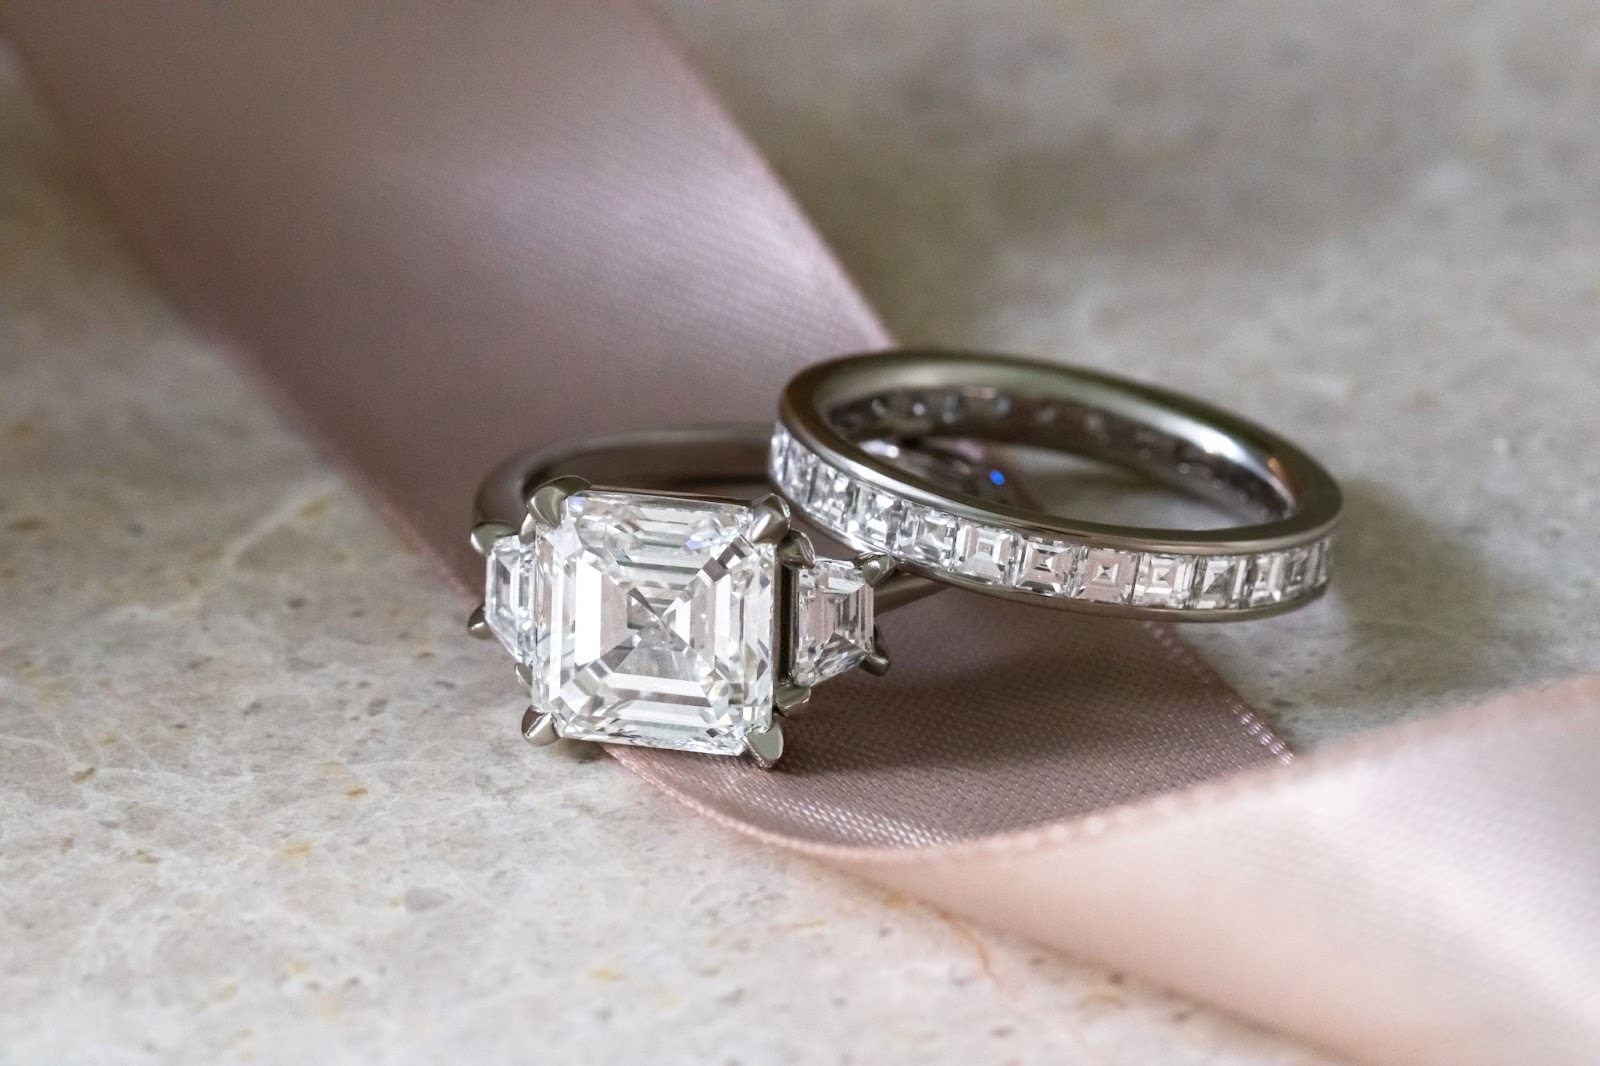   The best engagement ring brand for your special day.